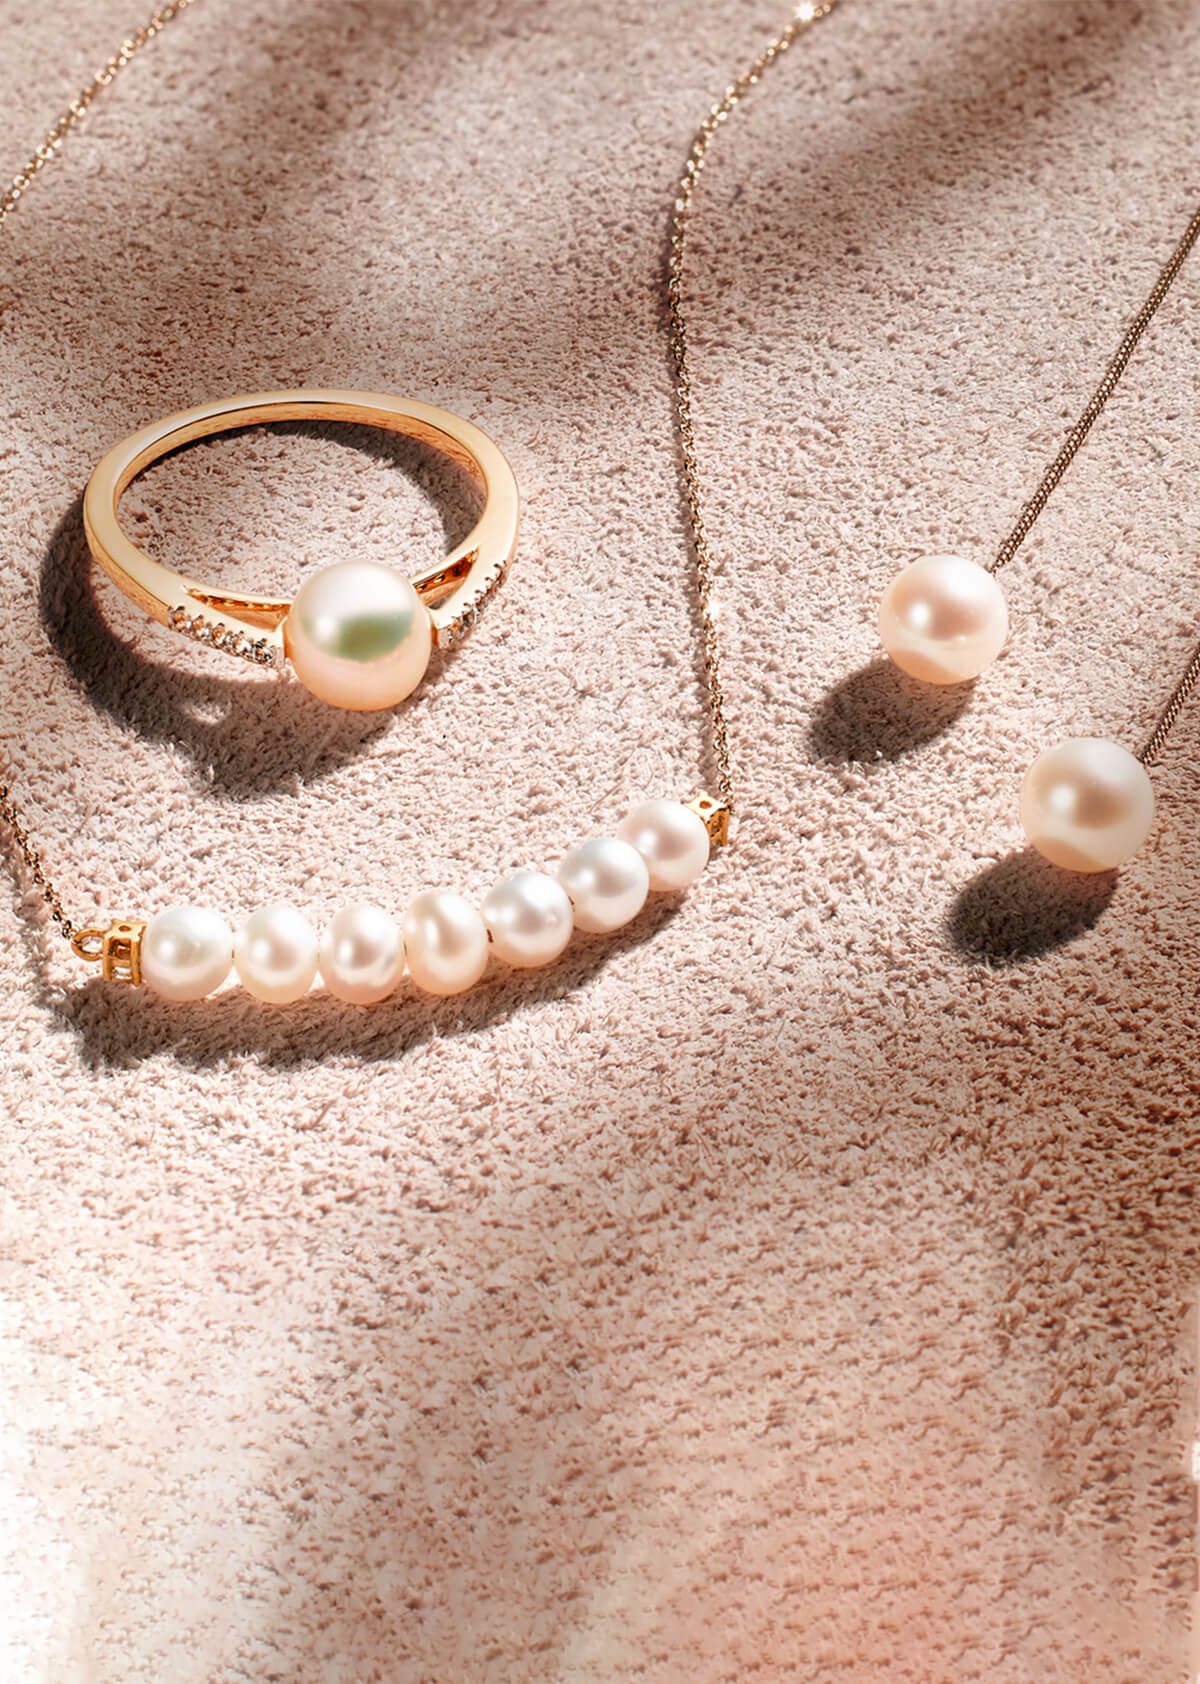 How to wear a pearl necklace, Jewelry Guide